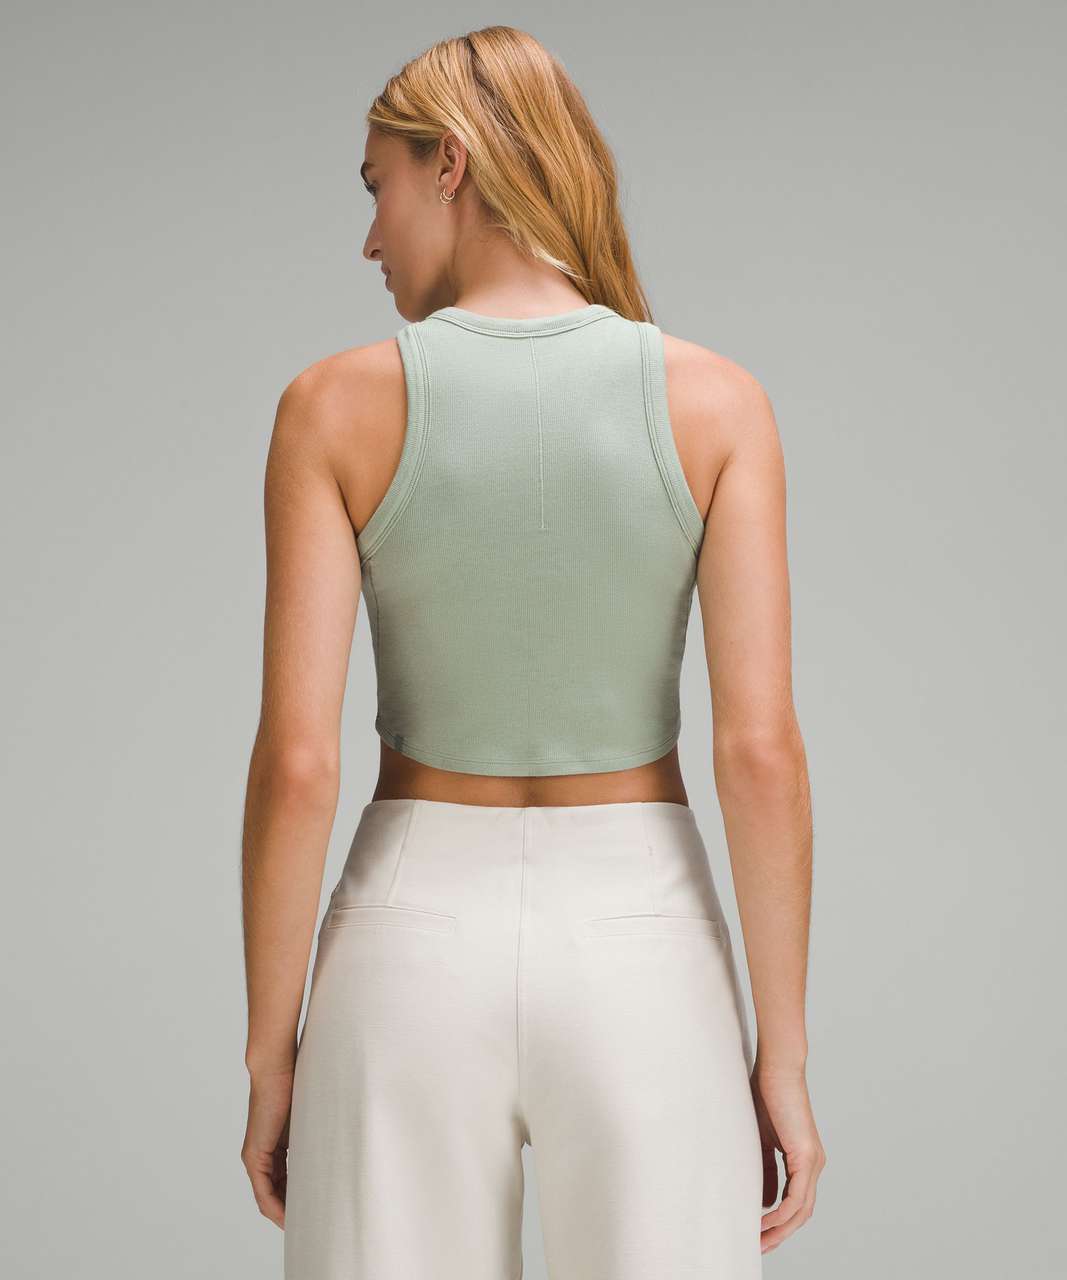 Lululemon Hold Tight Cropped Tank Top - Palm Court